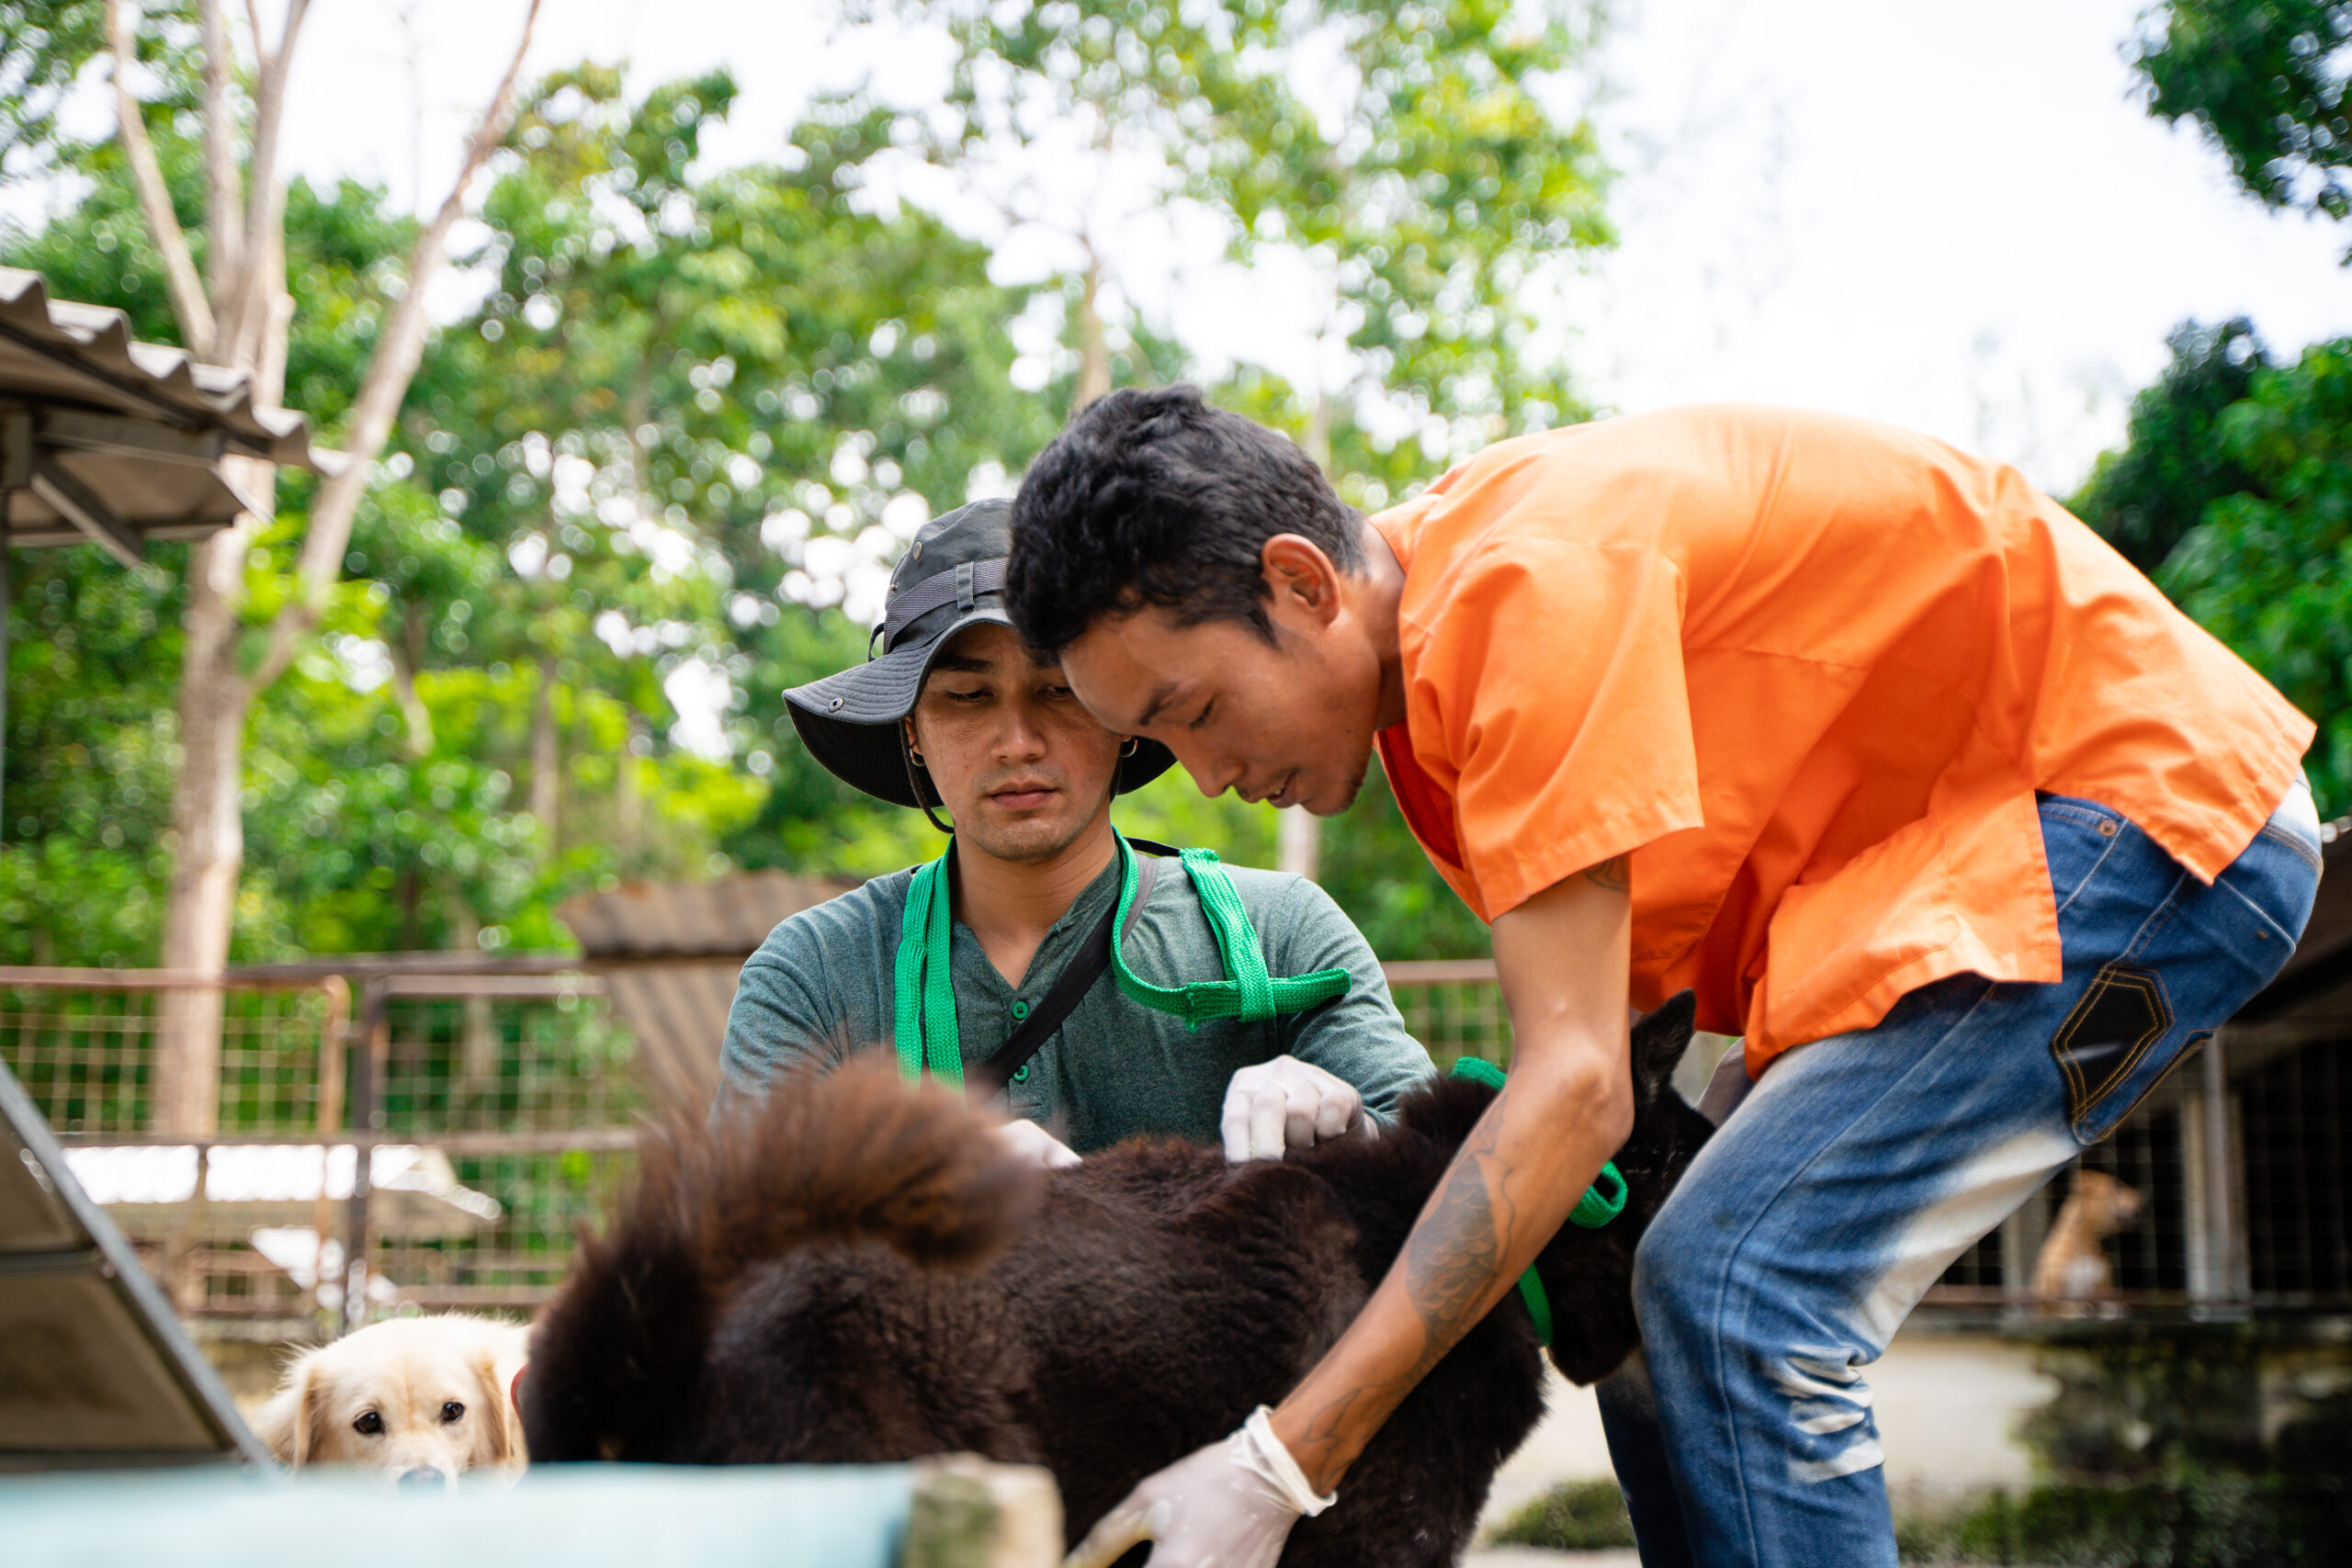 Soi Dog veterinarian team catches, vaccinates, and treats dogs for ticks, fleas, and parasites.